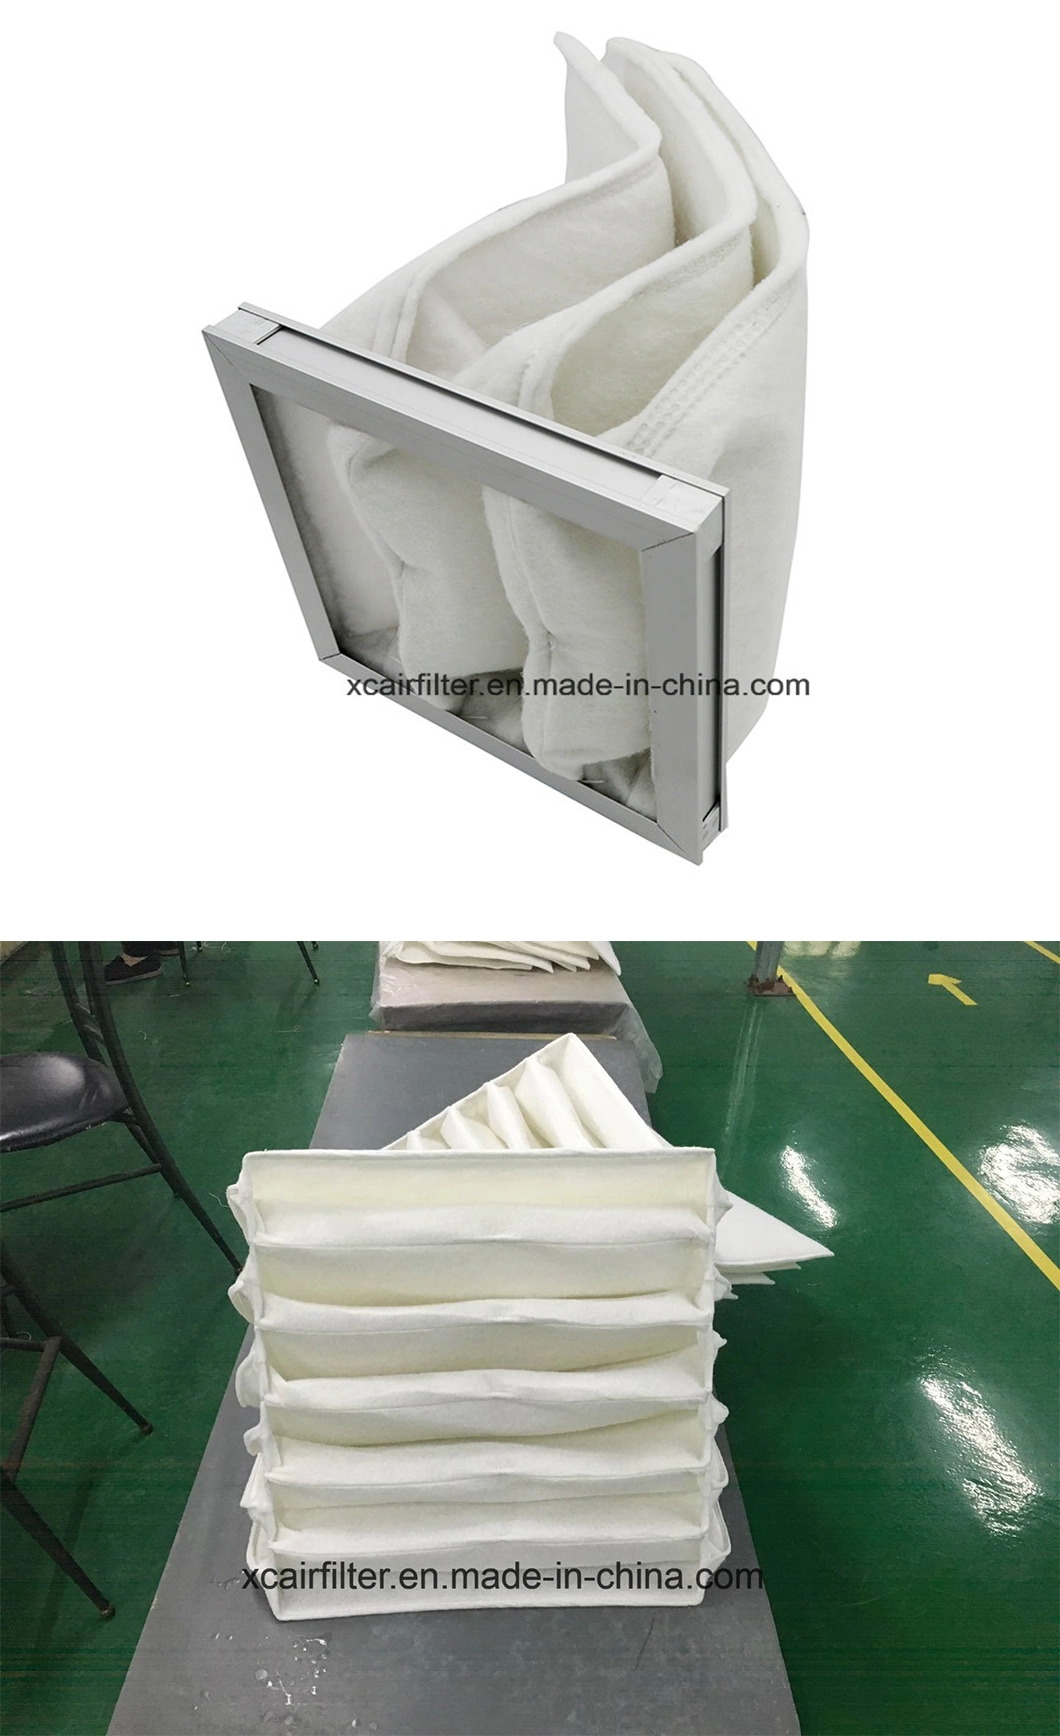 Primary Efficiency Pocket Air Filter with Core Material Synthetic Fiber